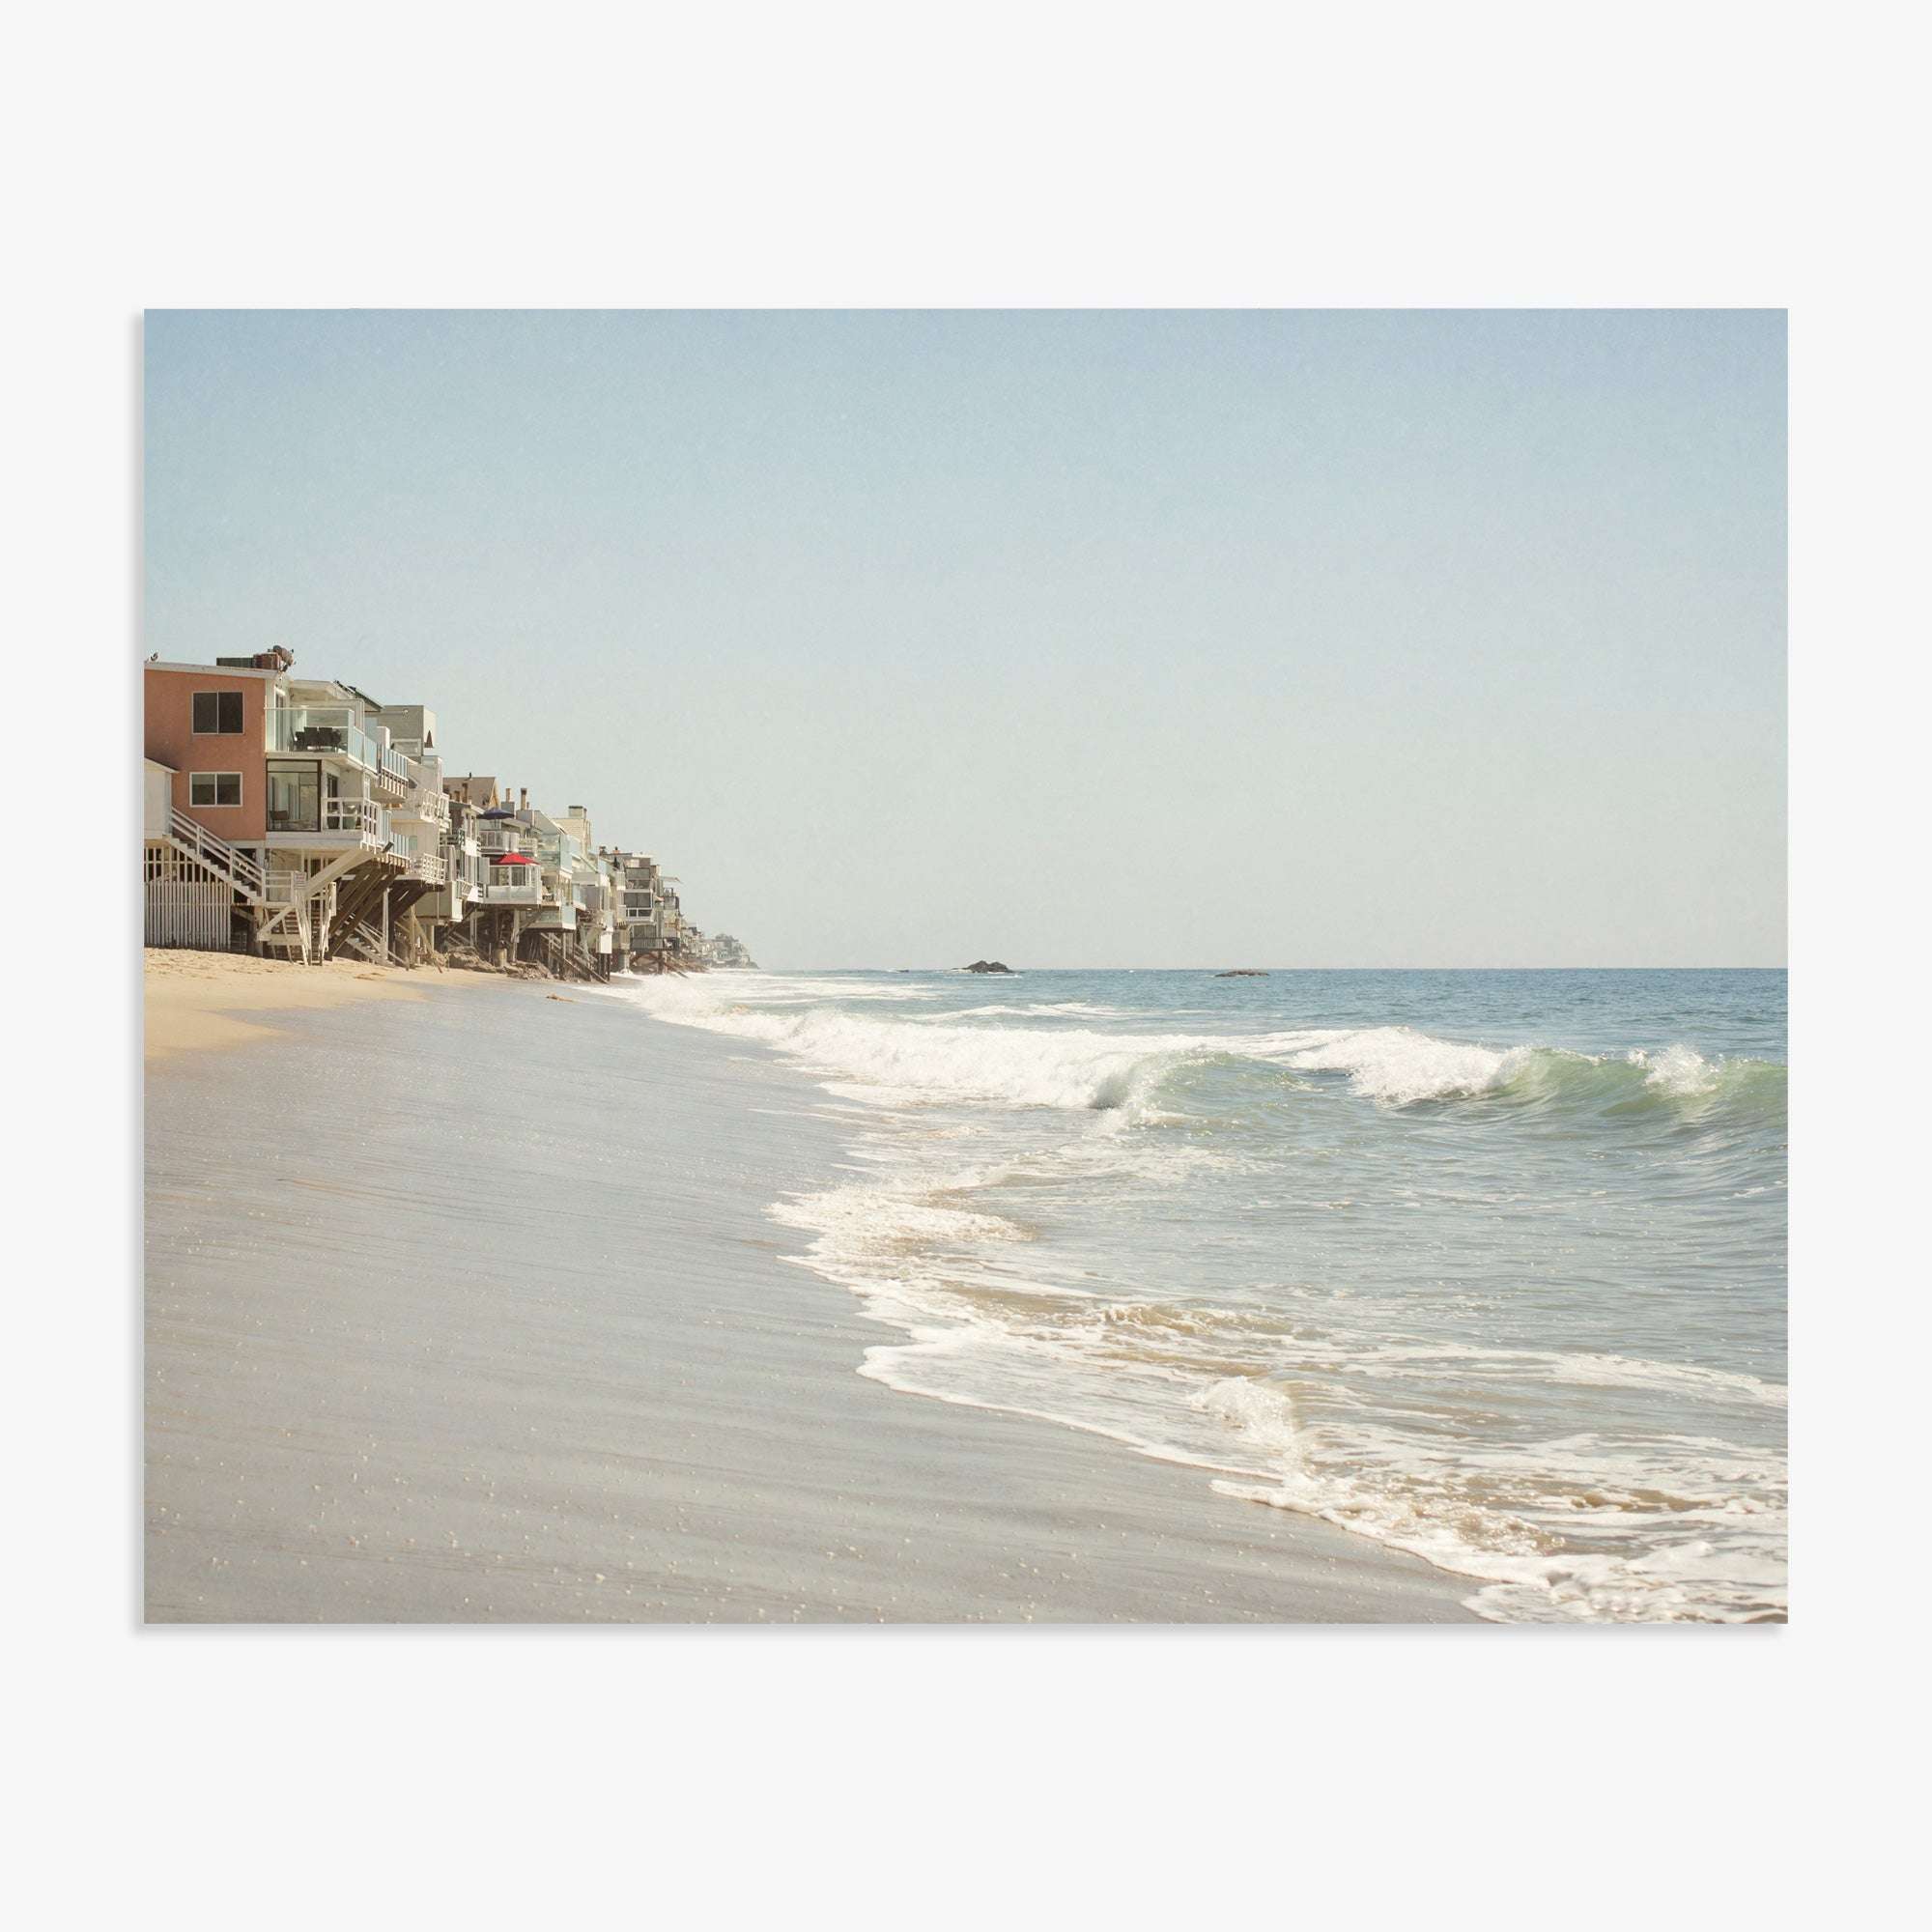 A serene Malibu coastline scene with gentle waves lapping at the shore and a row of multistory beach houses on stilts, lining the sandy coast under a clear sky featuring the Malibu Beach House Print by Offley Green.